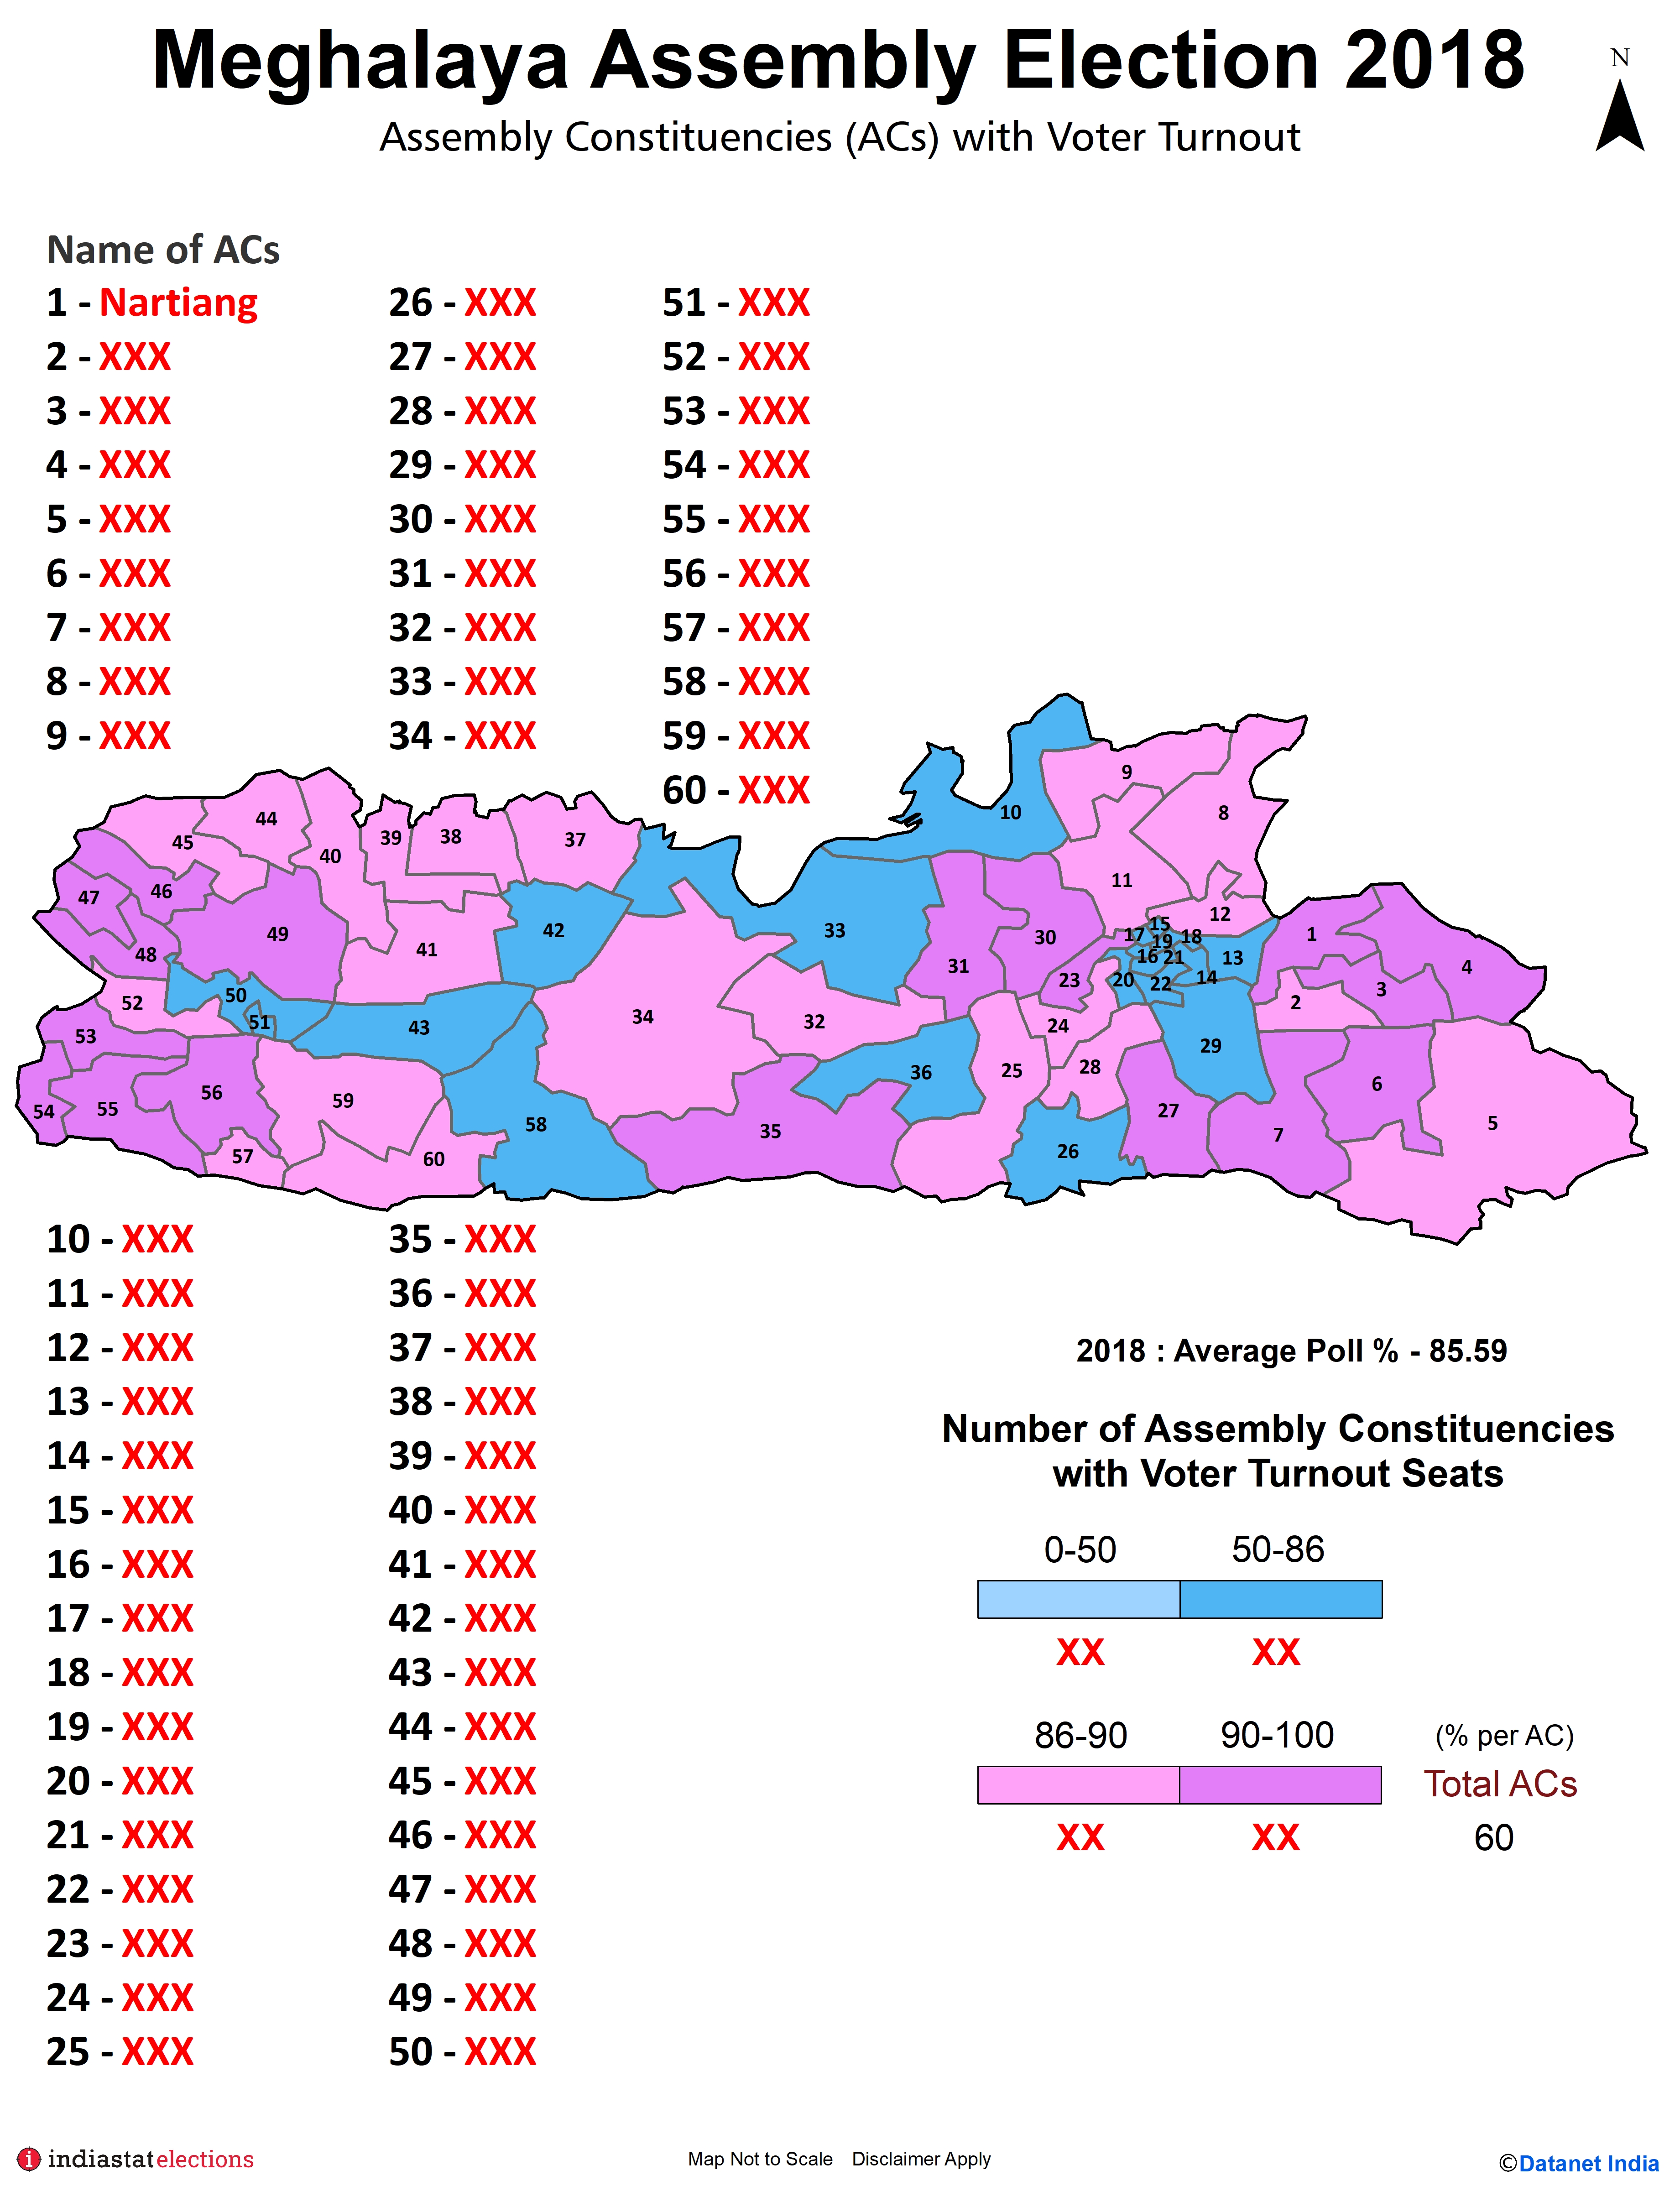 Assembly Constituencies (ACs) with Voter Turnout in Meghalaya (Assembly Election - 2018)